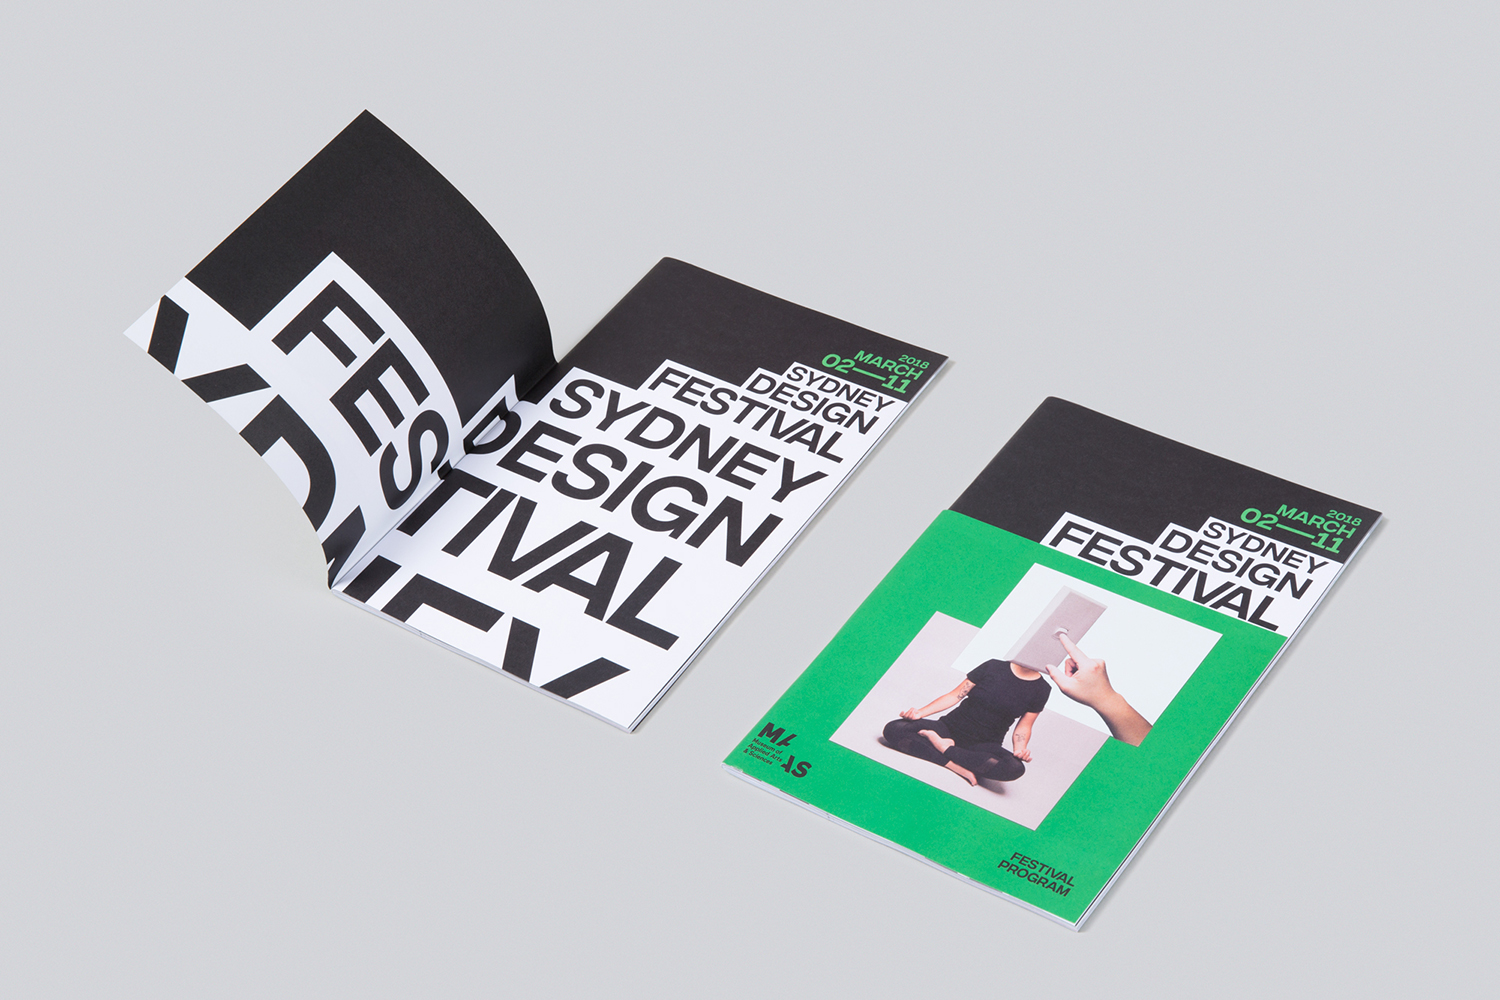 Graphic identity design by Re for the Sydney Design Festival